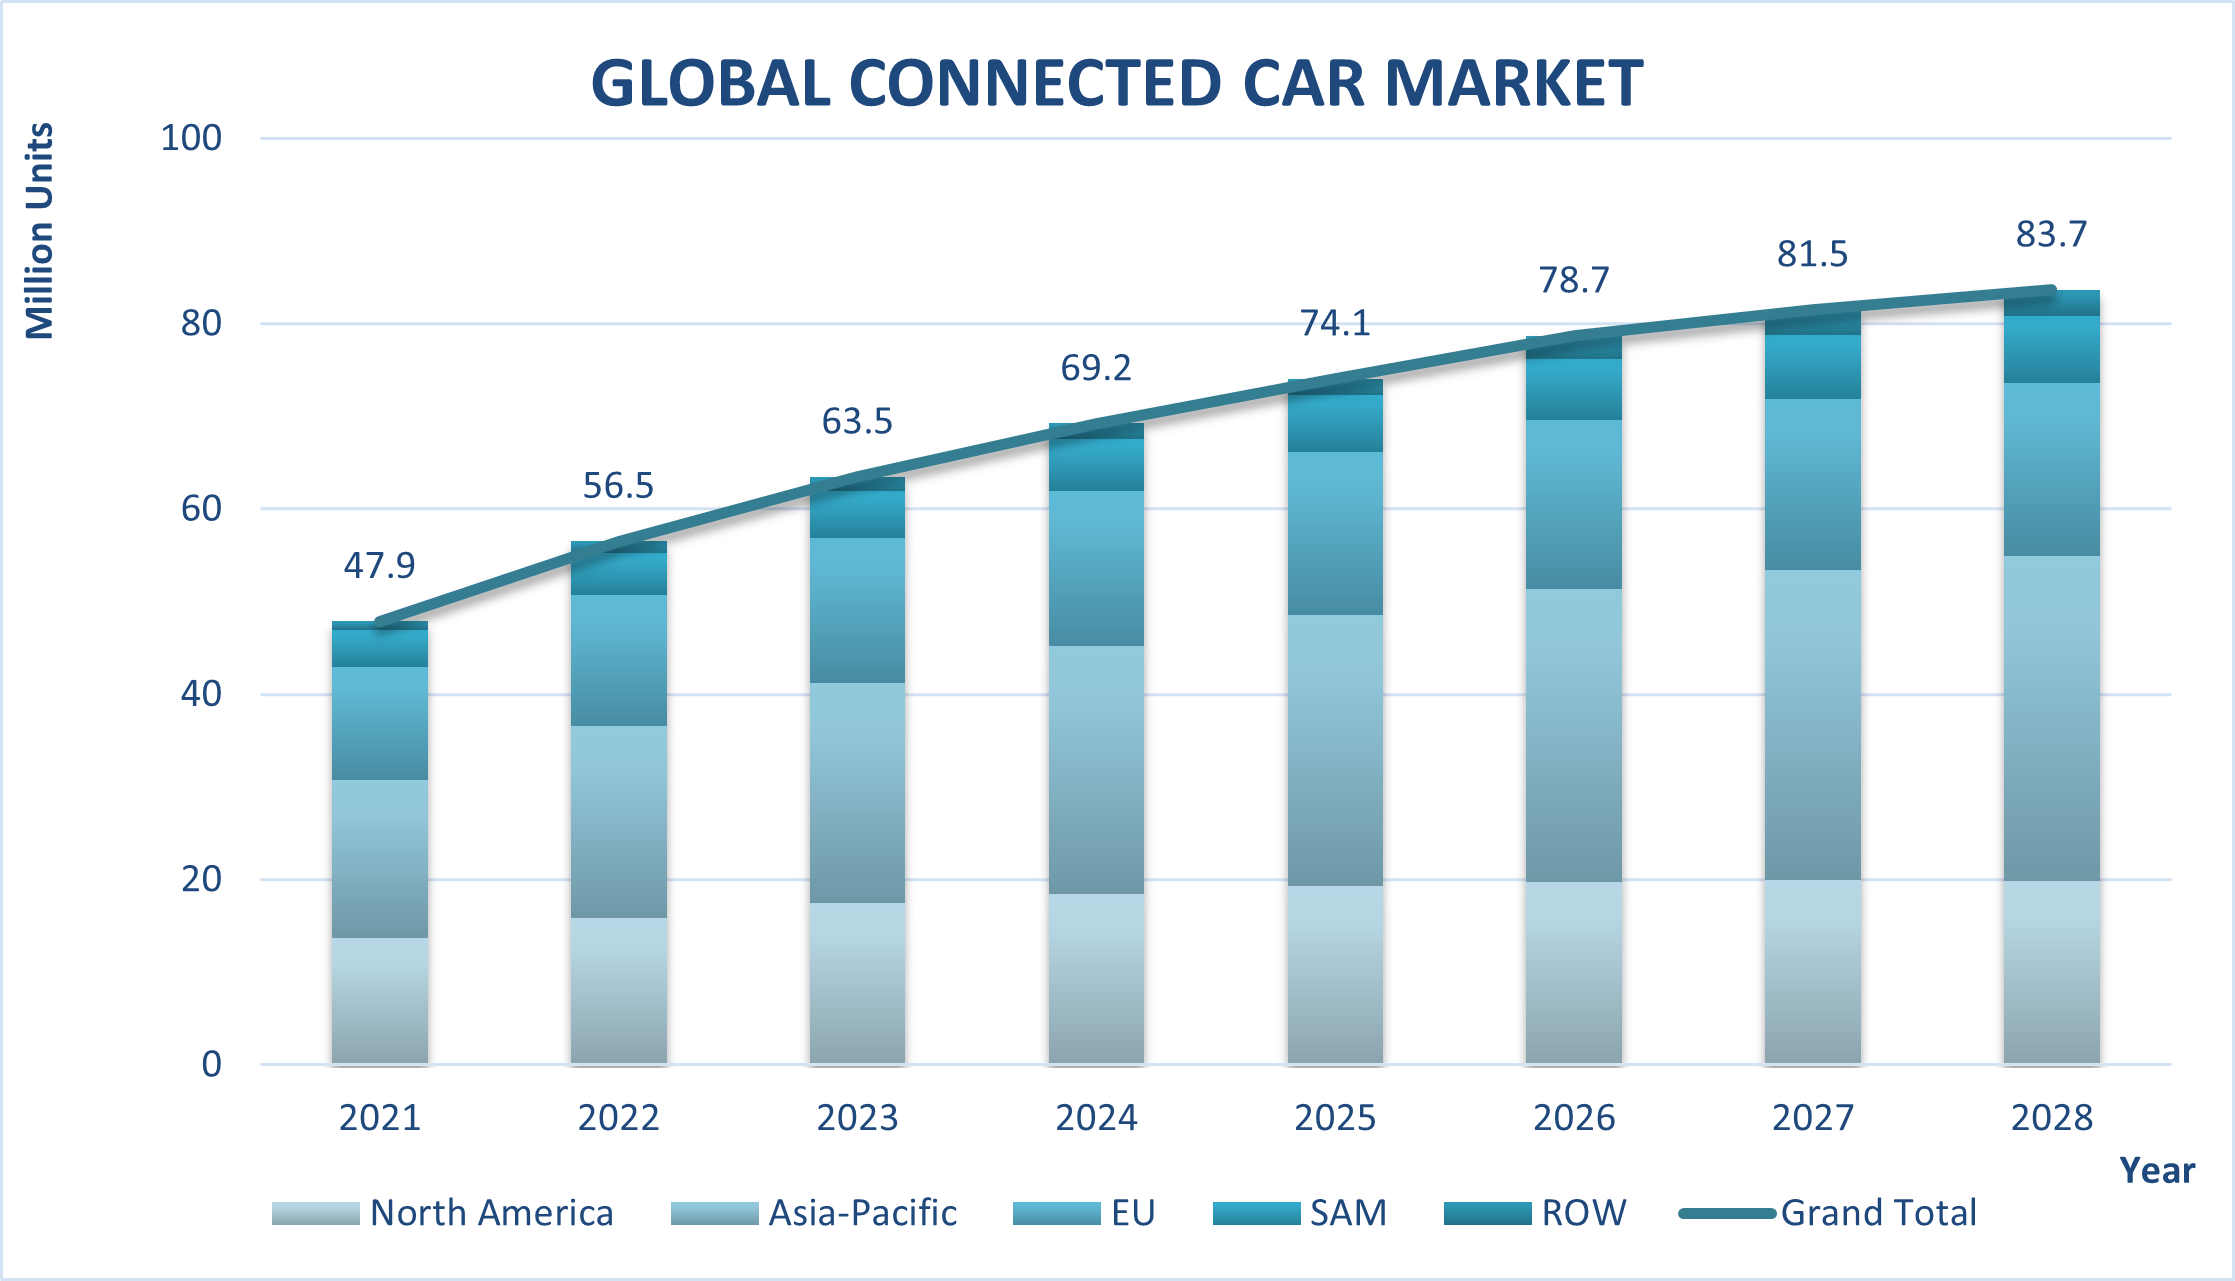 Global Connected Car Market, 2021-2028